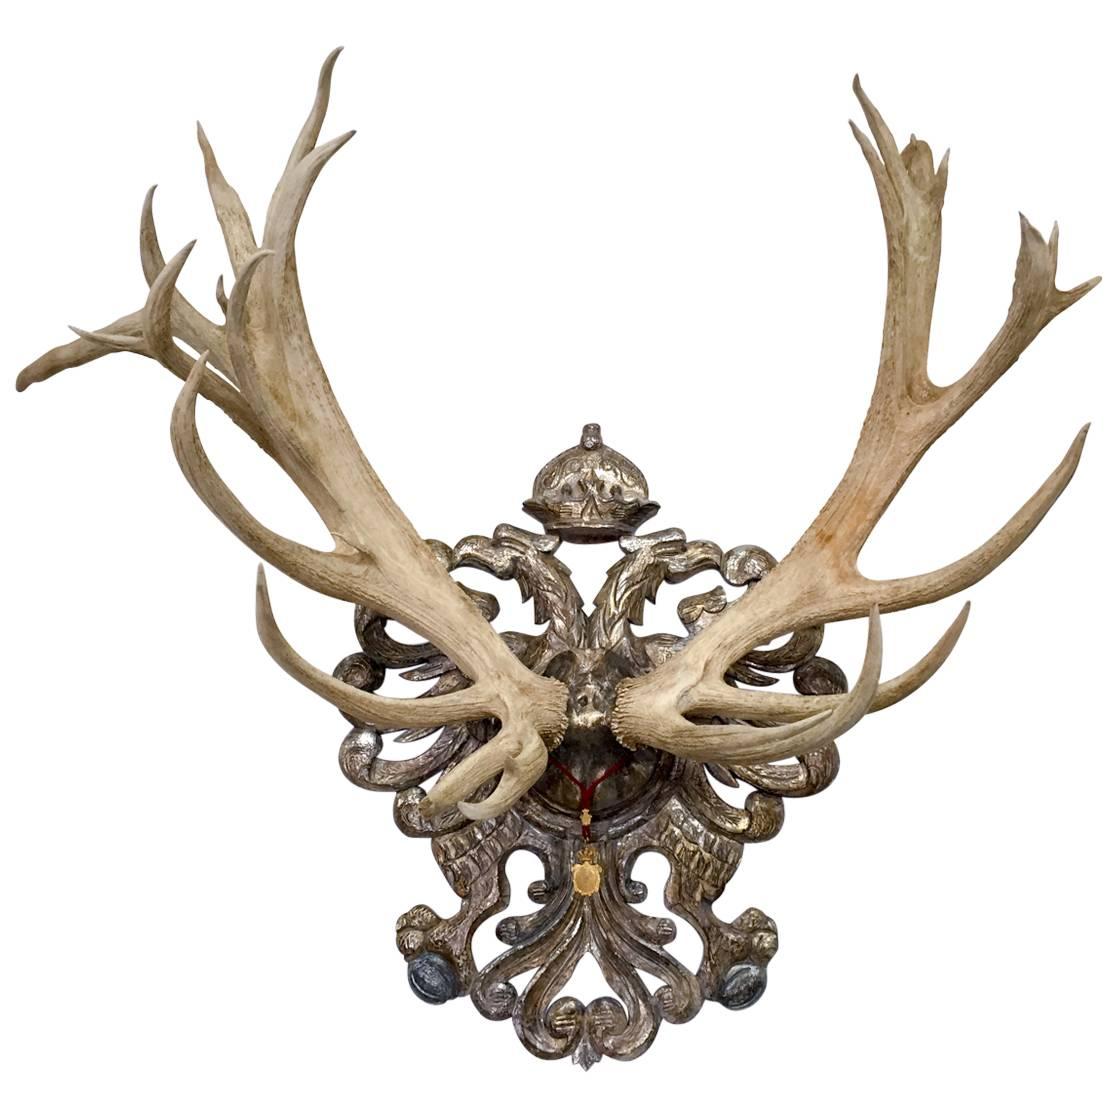 19th Century Habsburg Red Stag Trophy from Franz Joseph's Castle at Eckartsau